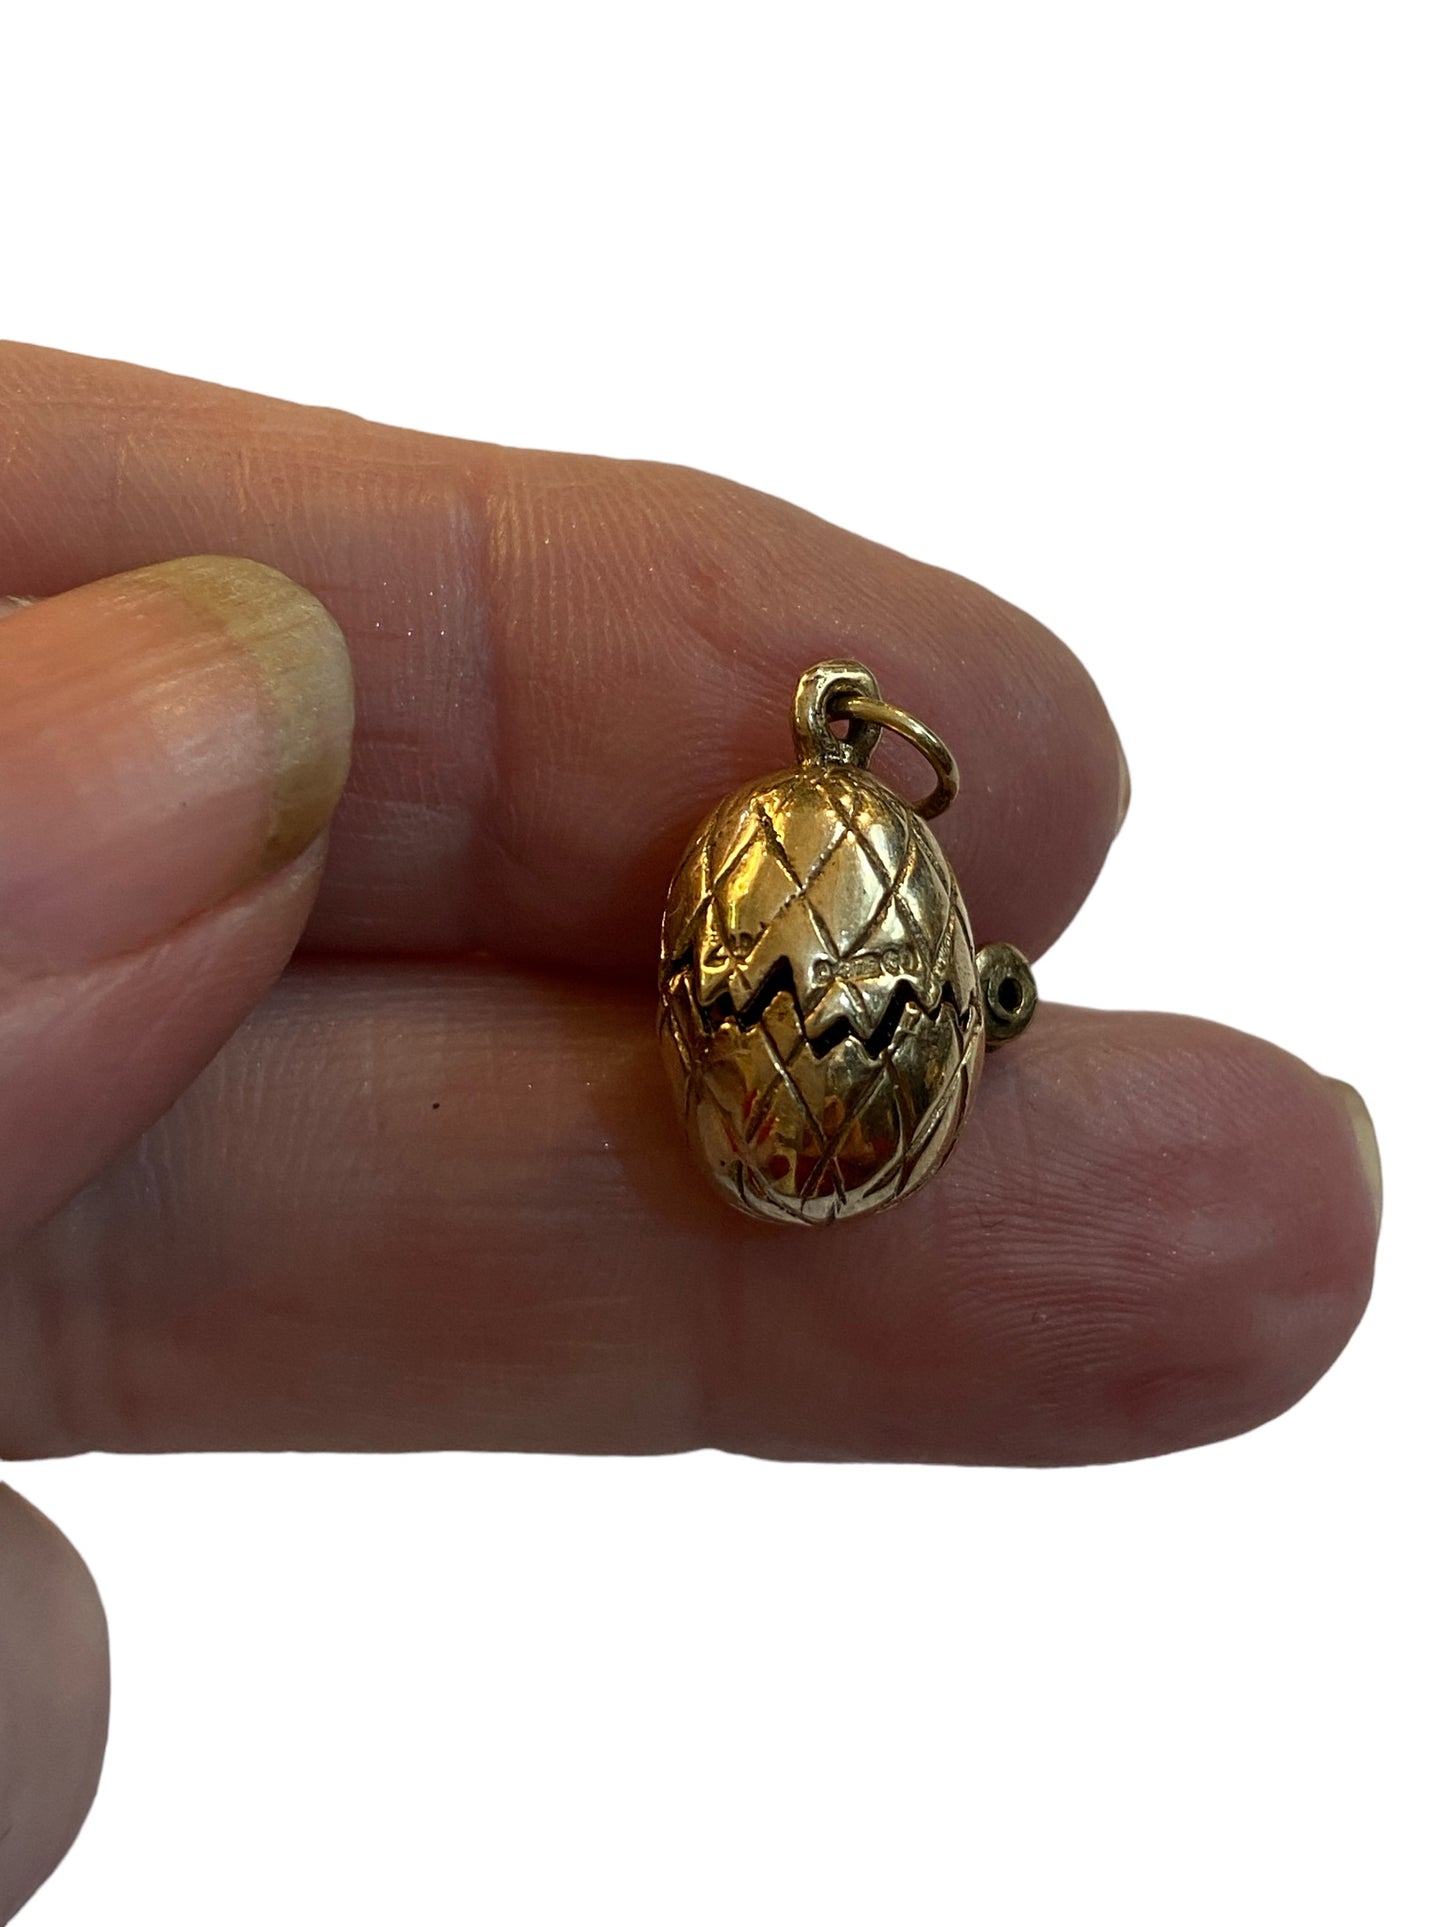 9ct vintage egg charm with enamel chick inside circa 1965